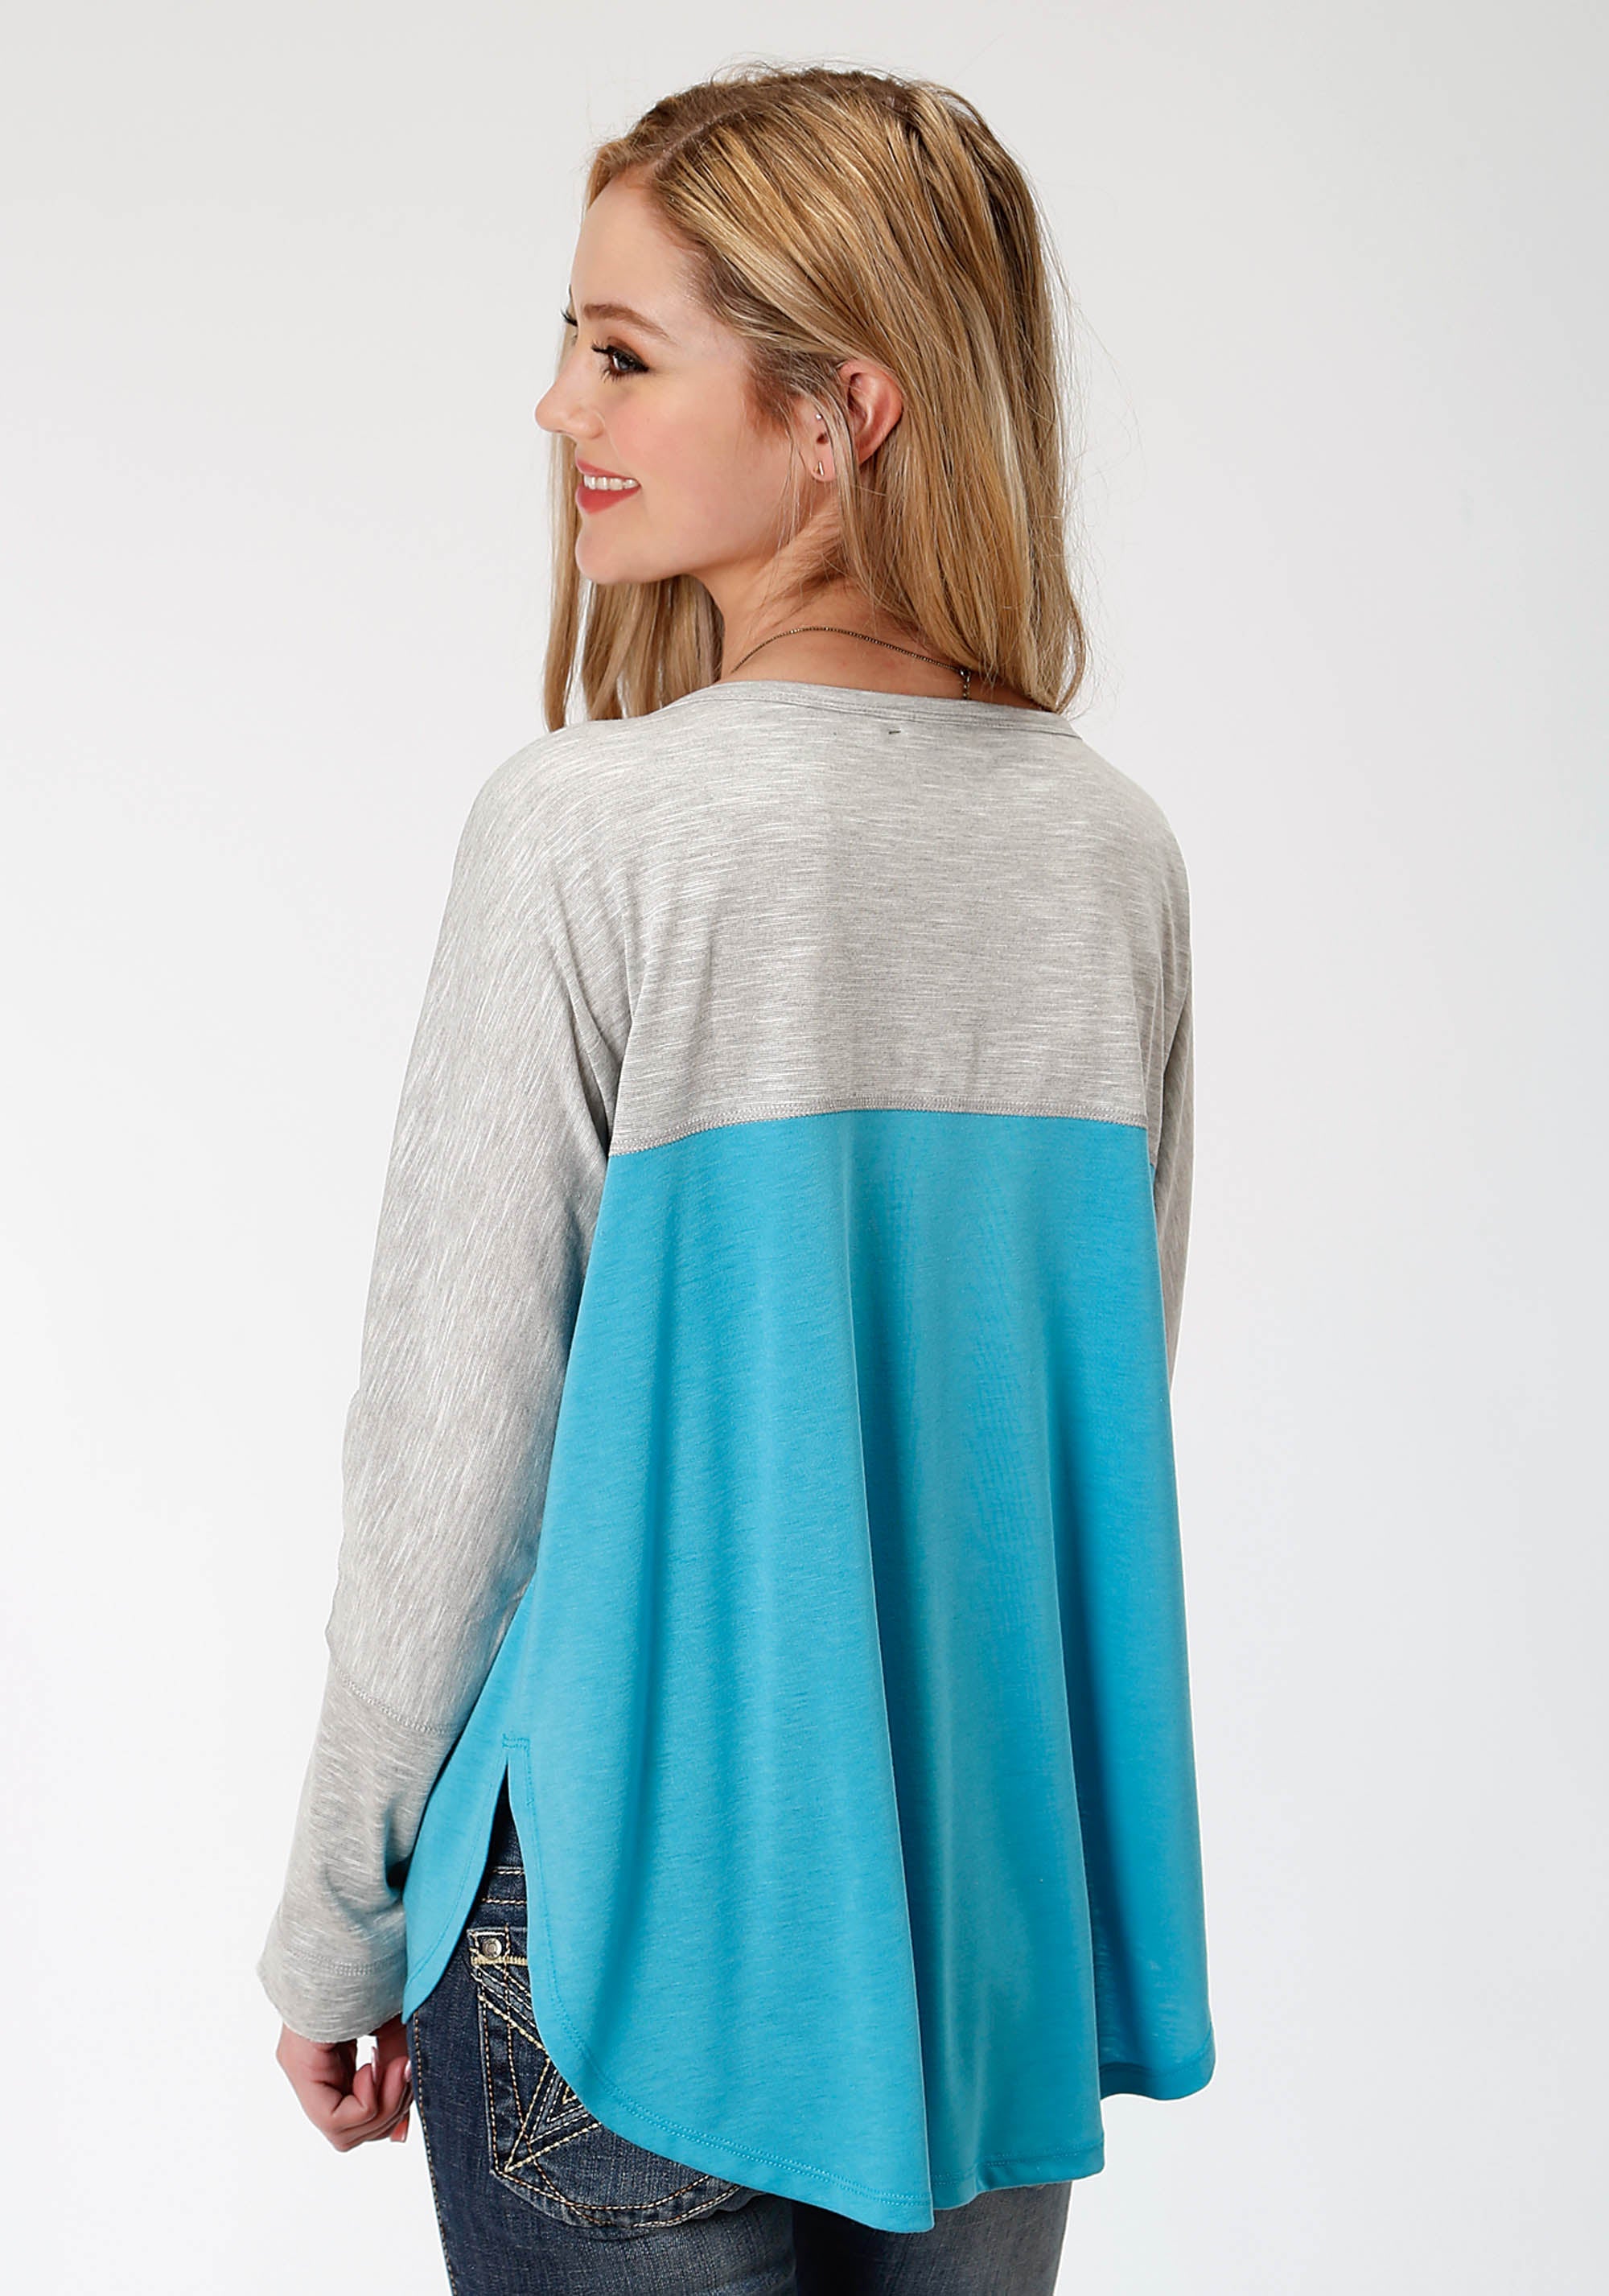 Roper Womens Grey And Blue Long Sleeve Knit Top